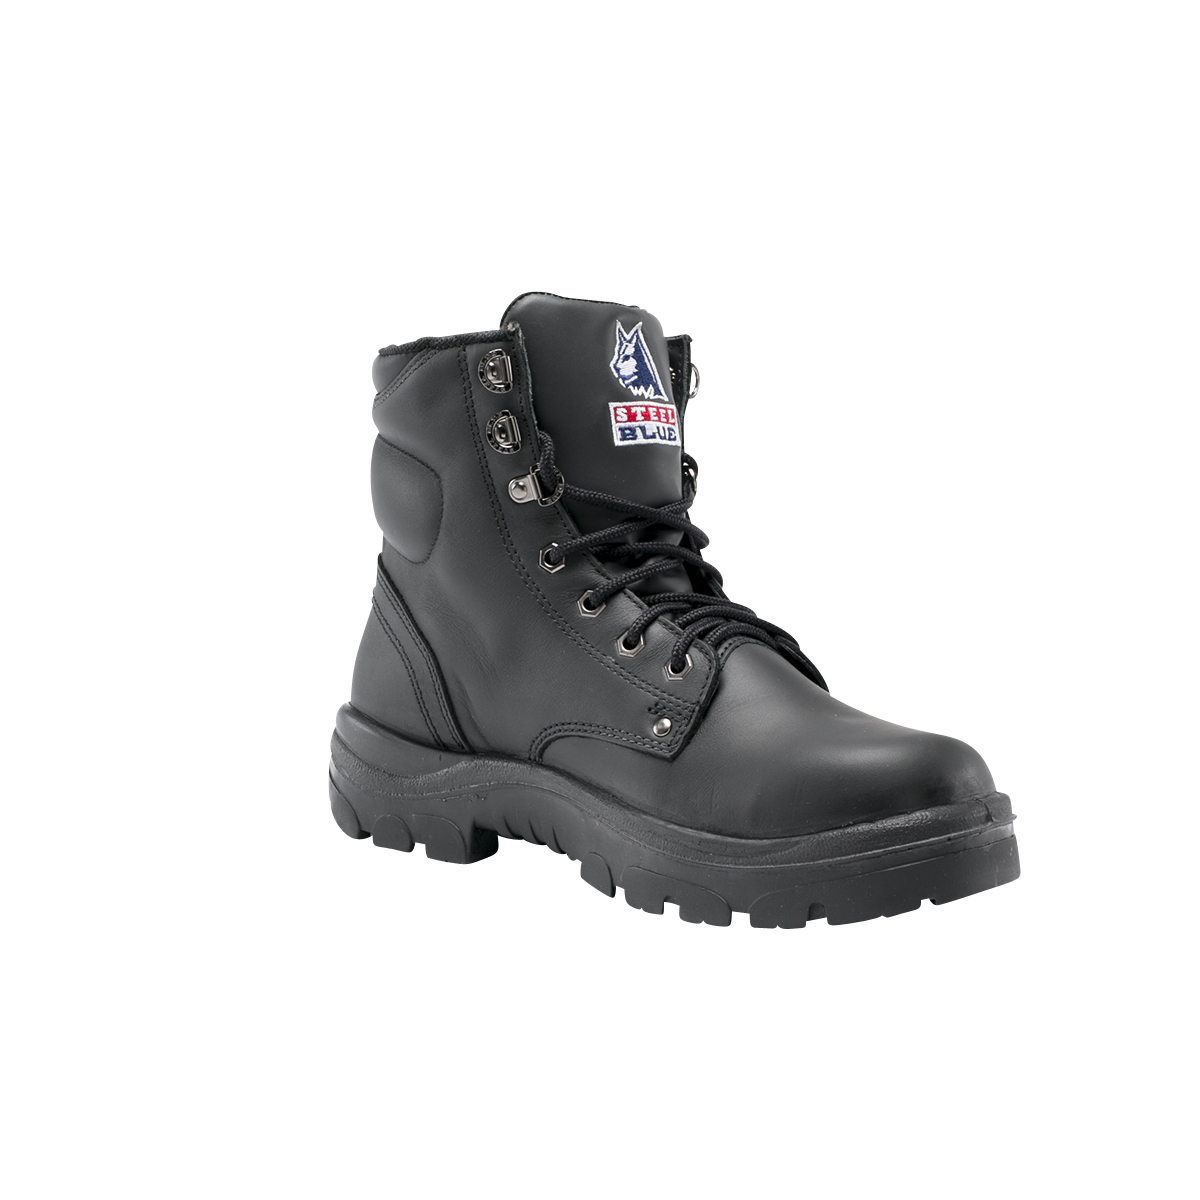 SAFETY BOOT ARGYLE NITRILE S10 -ANKLE LACE UP BLACK